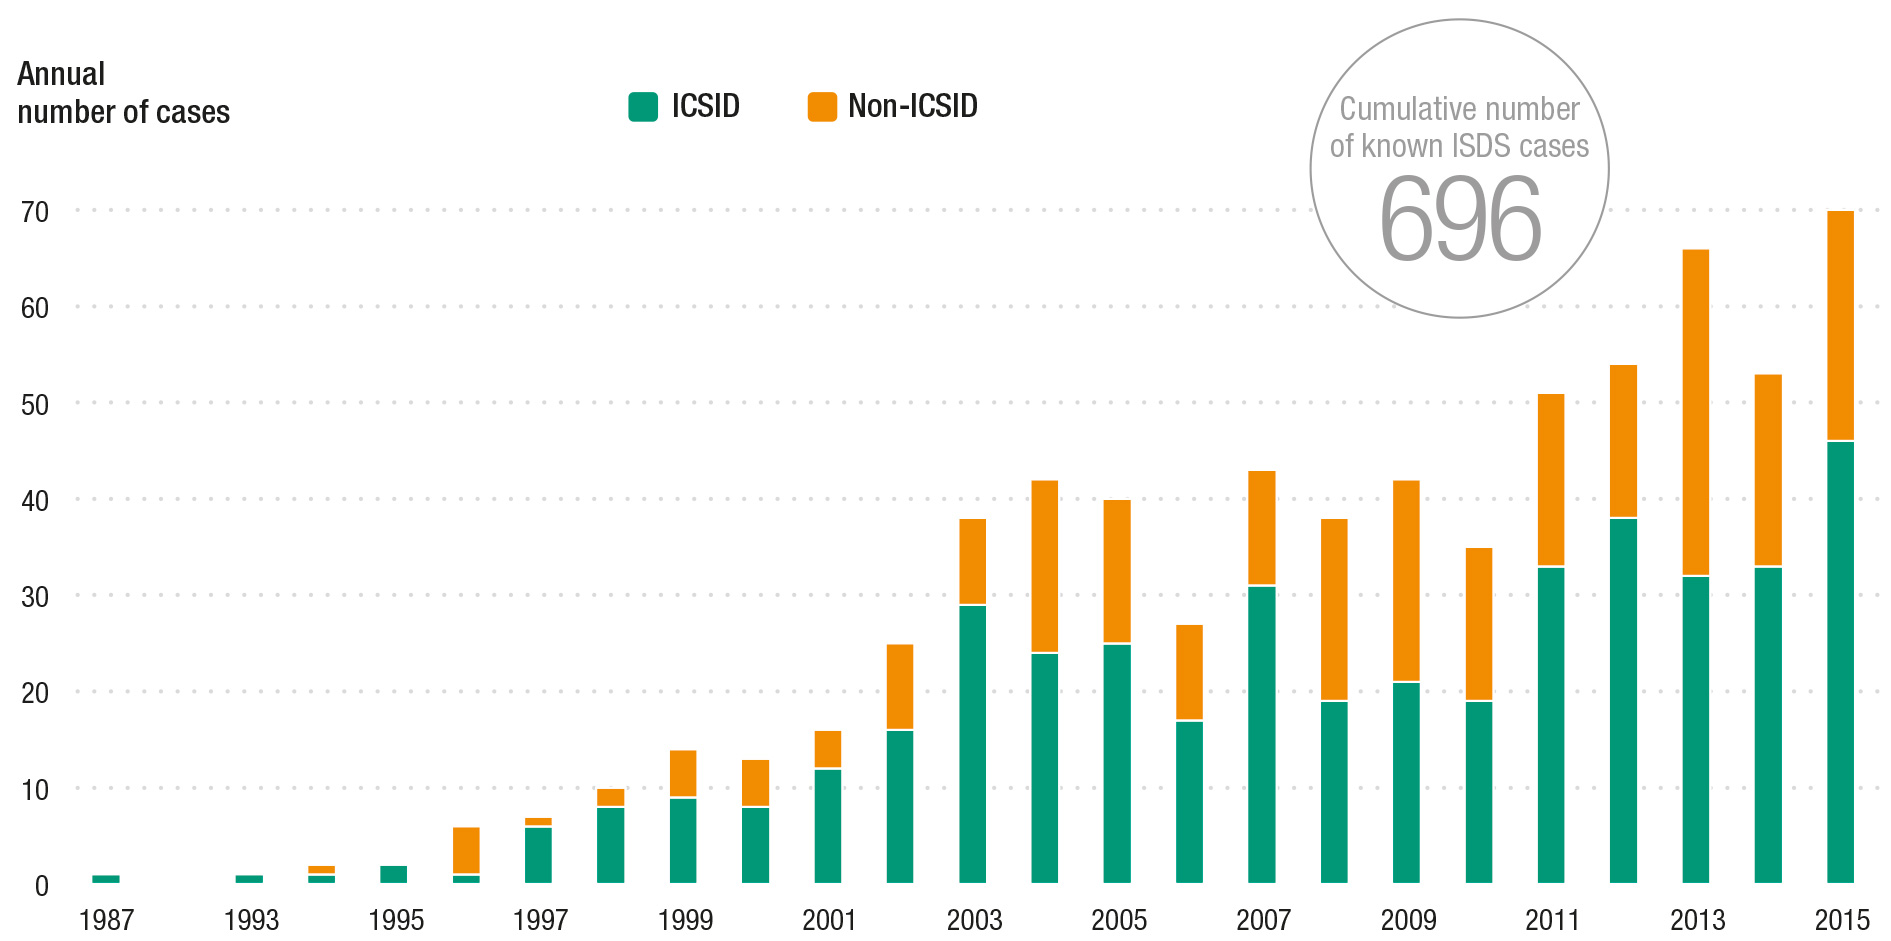 While investment agreements have become less popular in recent years, those negotiated still tend to include ISDS provisions and the number of ISDS dispute cases has never been higher. In 1997, the same year NAFTA was signed, ICSID cases came on the scene in a big way, doubling the previous ISDS annual average caseload of 0-5 cases up to nearly 10. Since then investors and lawyers haven't looked back, and 2015's record breaking 70 cases stands as new norm. Graphic by James Zhan, UNCTAD 2016WIR, courtesy of UNCTAD